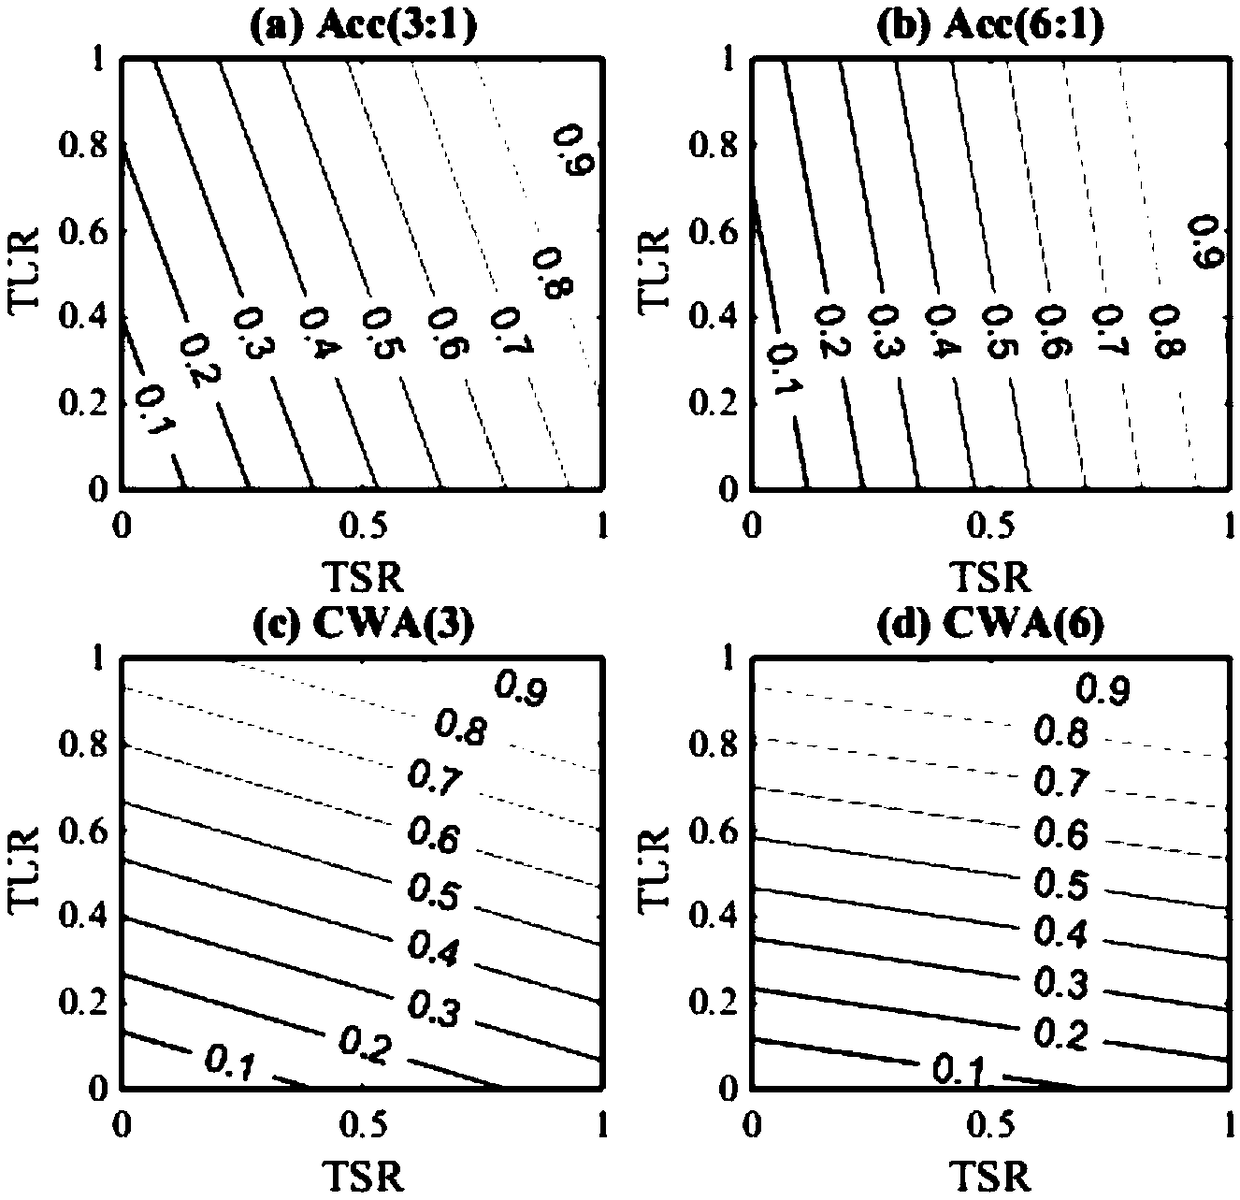 Power system transient stability key feature selection method considering class imbalance